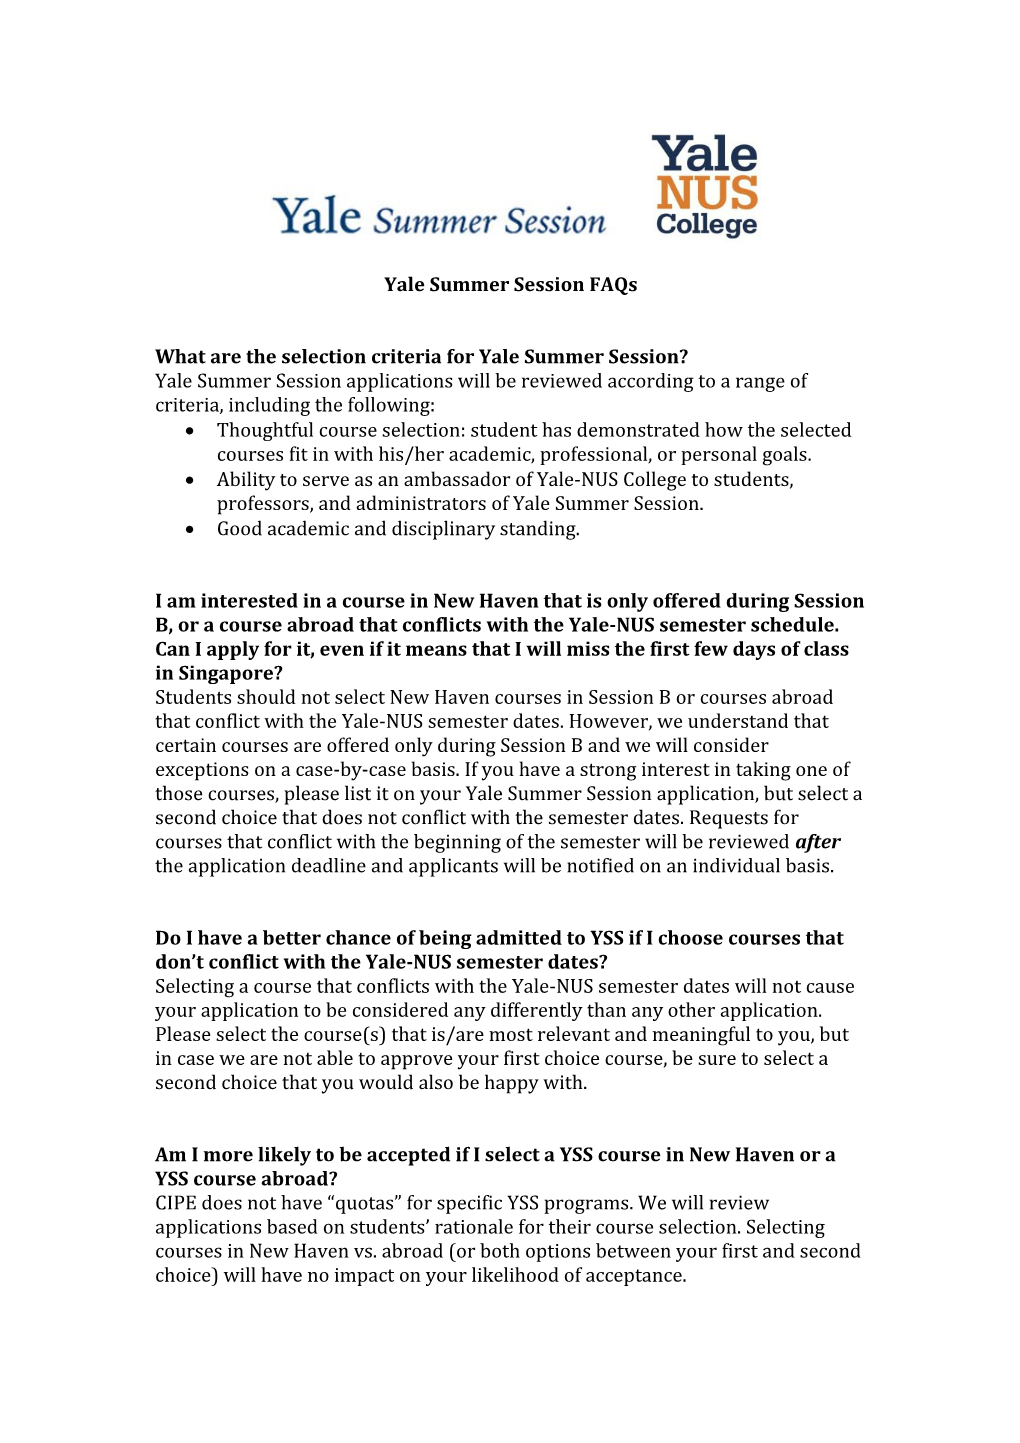 What Are the Selection Criteria for Yale Summer Session?